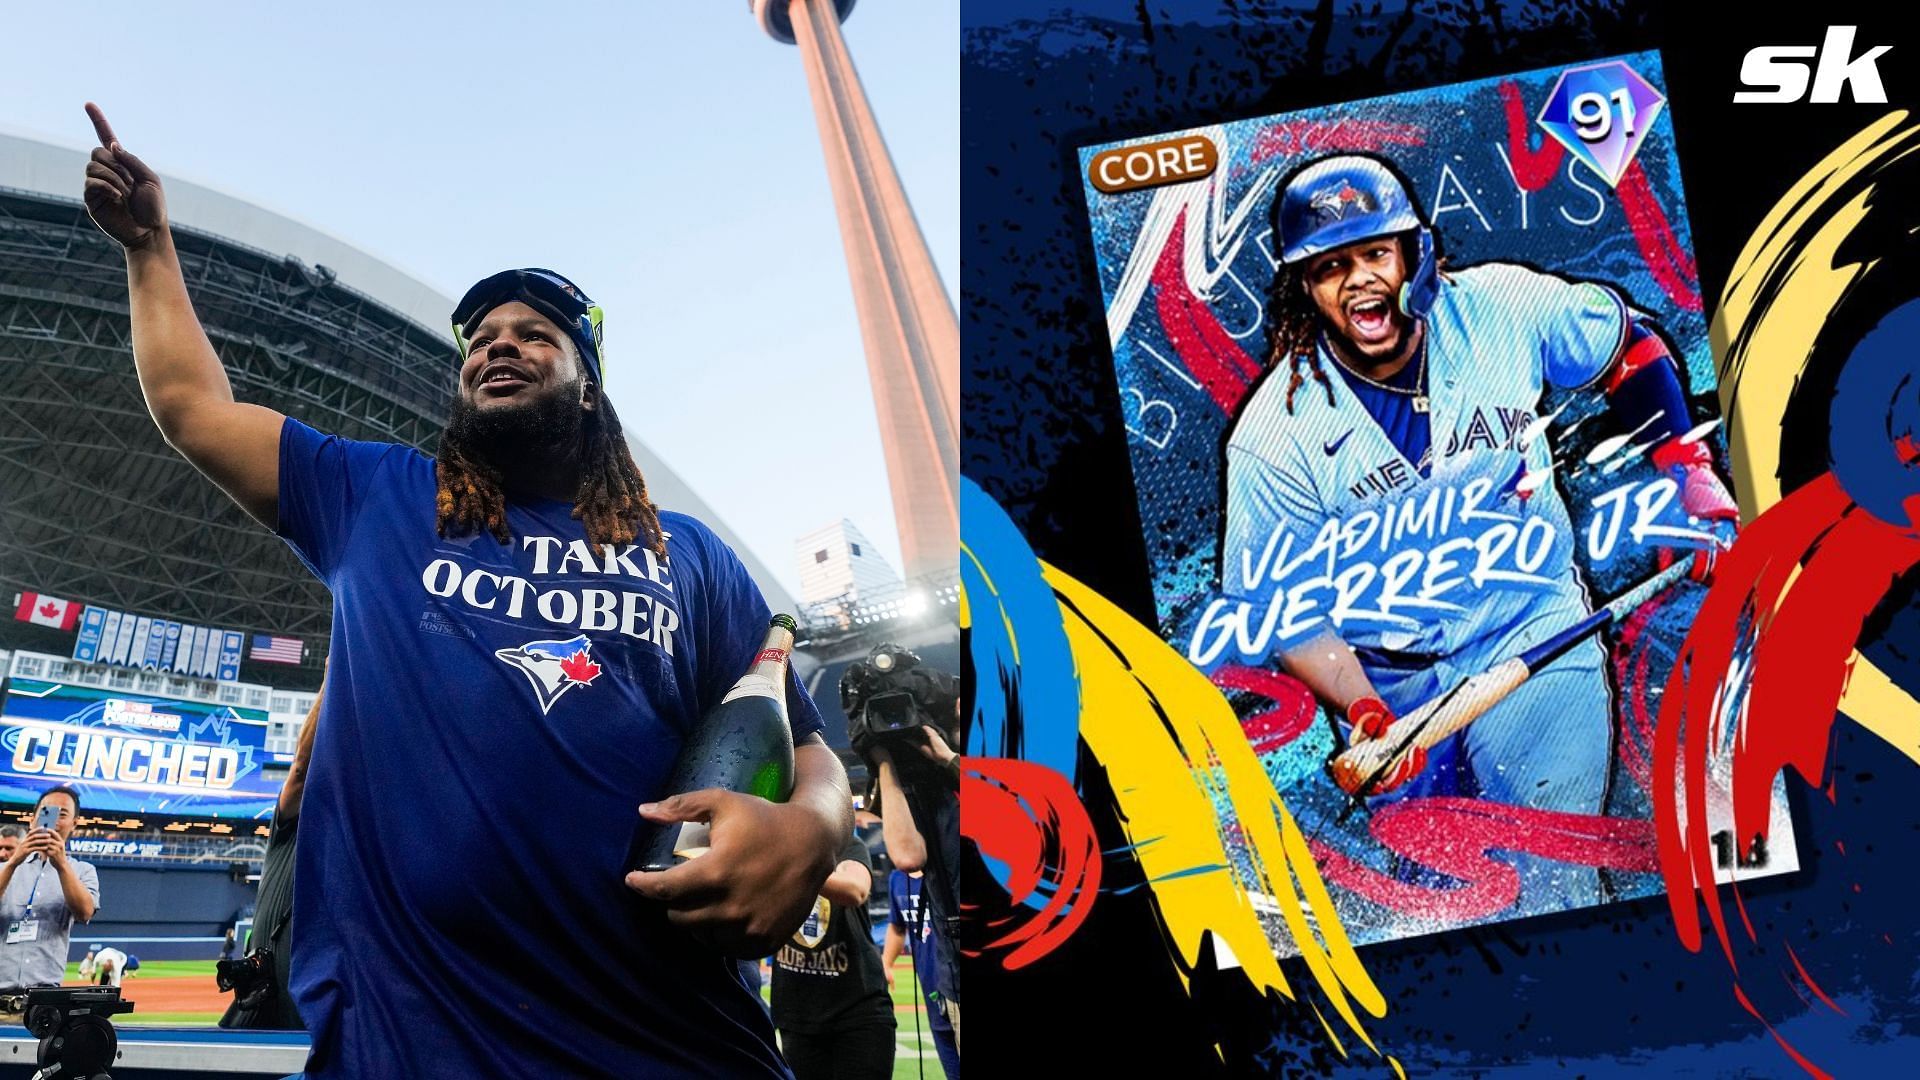 How to Acquire the Vladimir Guerrero Jr. Hyper Series Card? Steps, details, and more